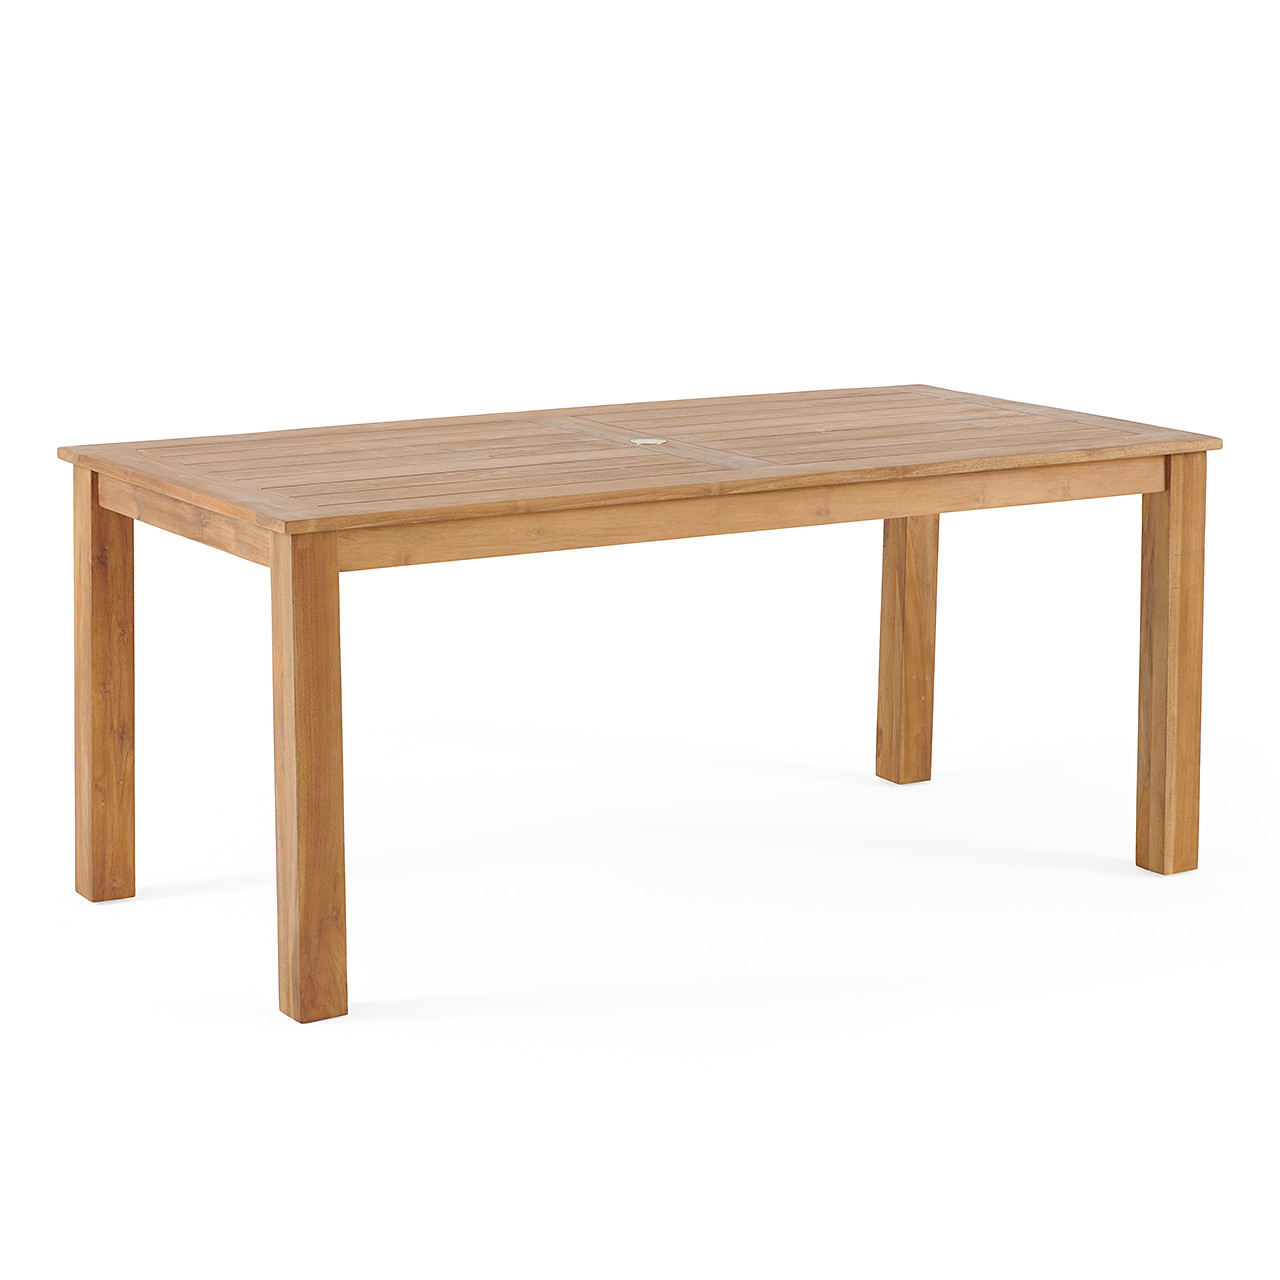 Oxford Teak 71 x 36 in. Rect. Dining Table